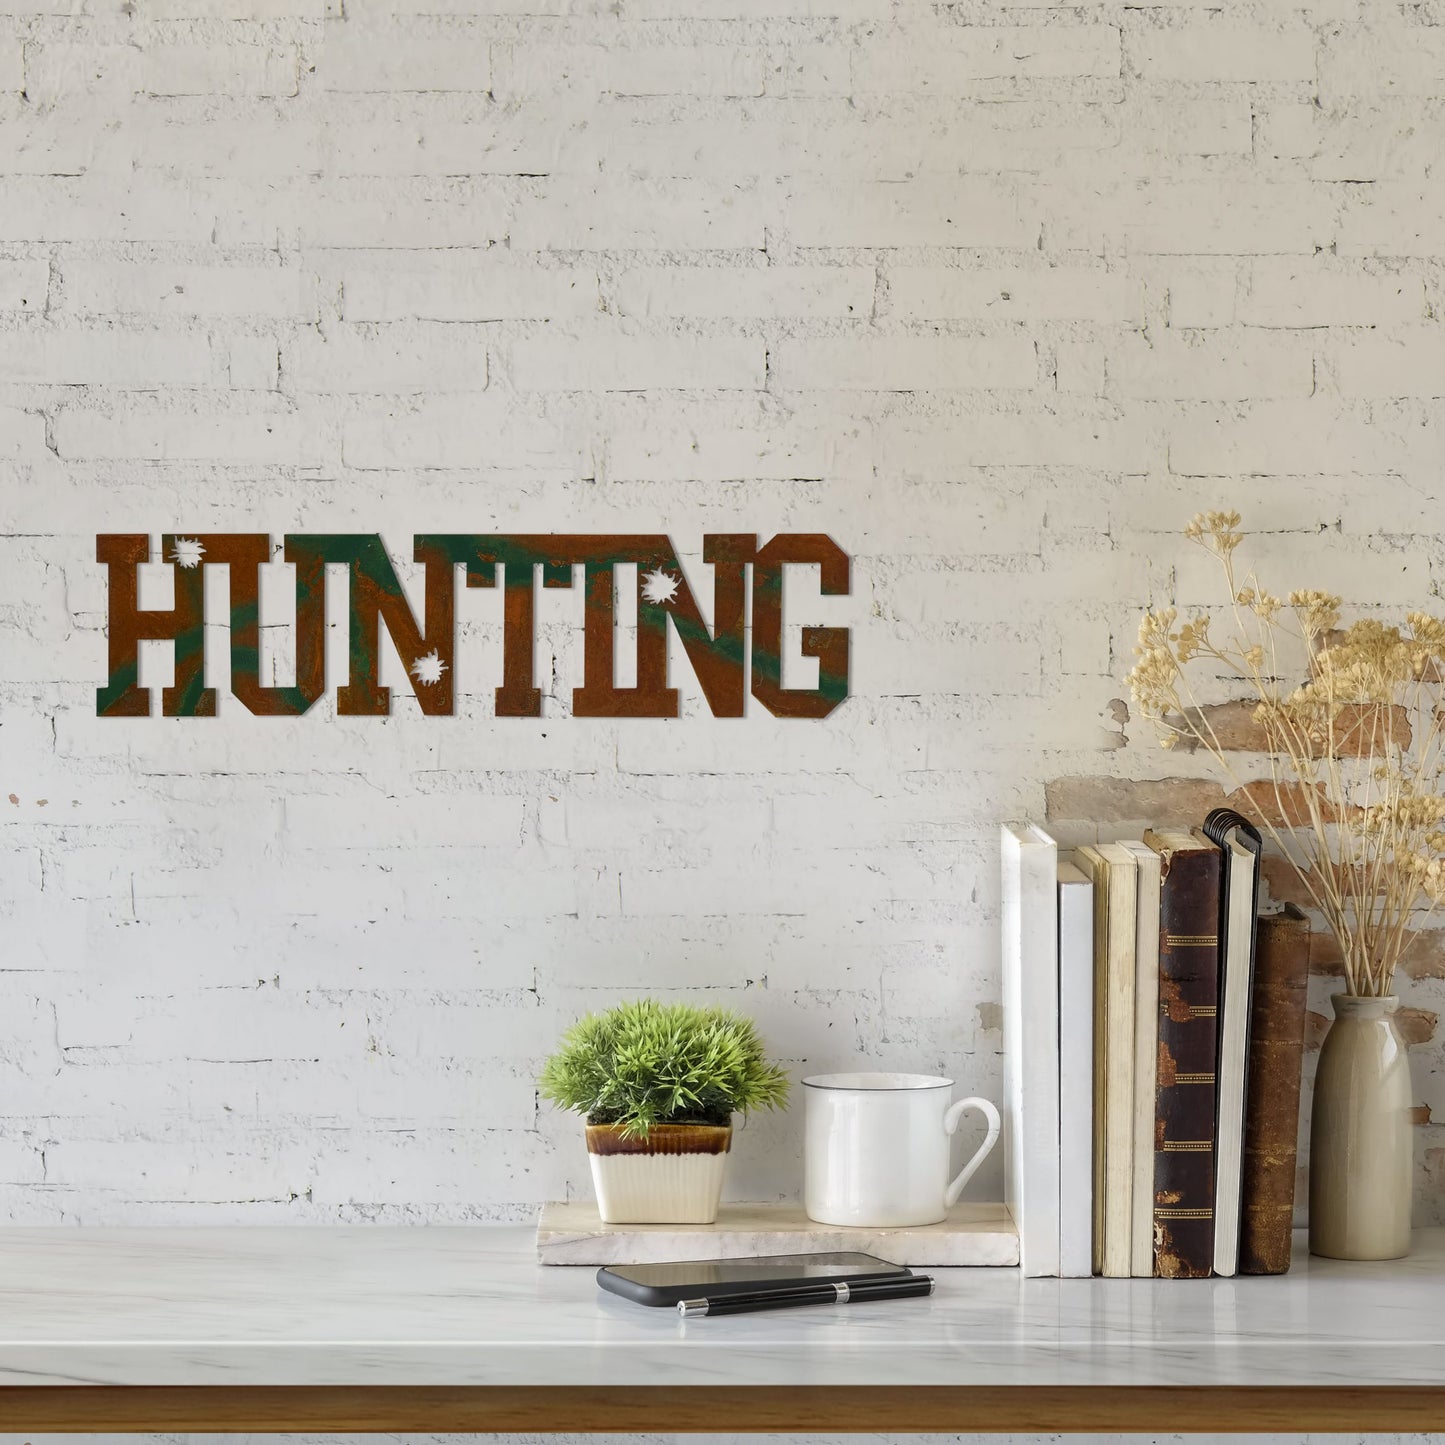 hunting-word-over-counter-scaled-1